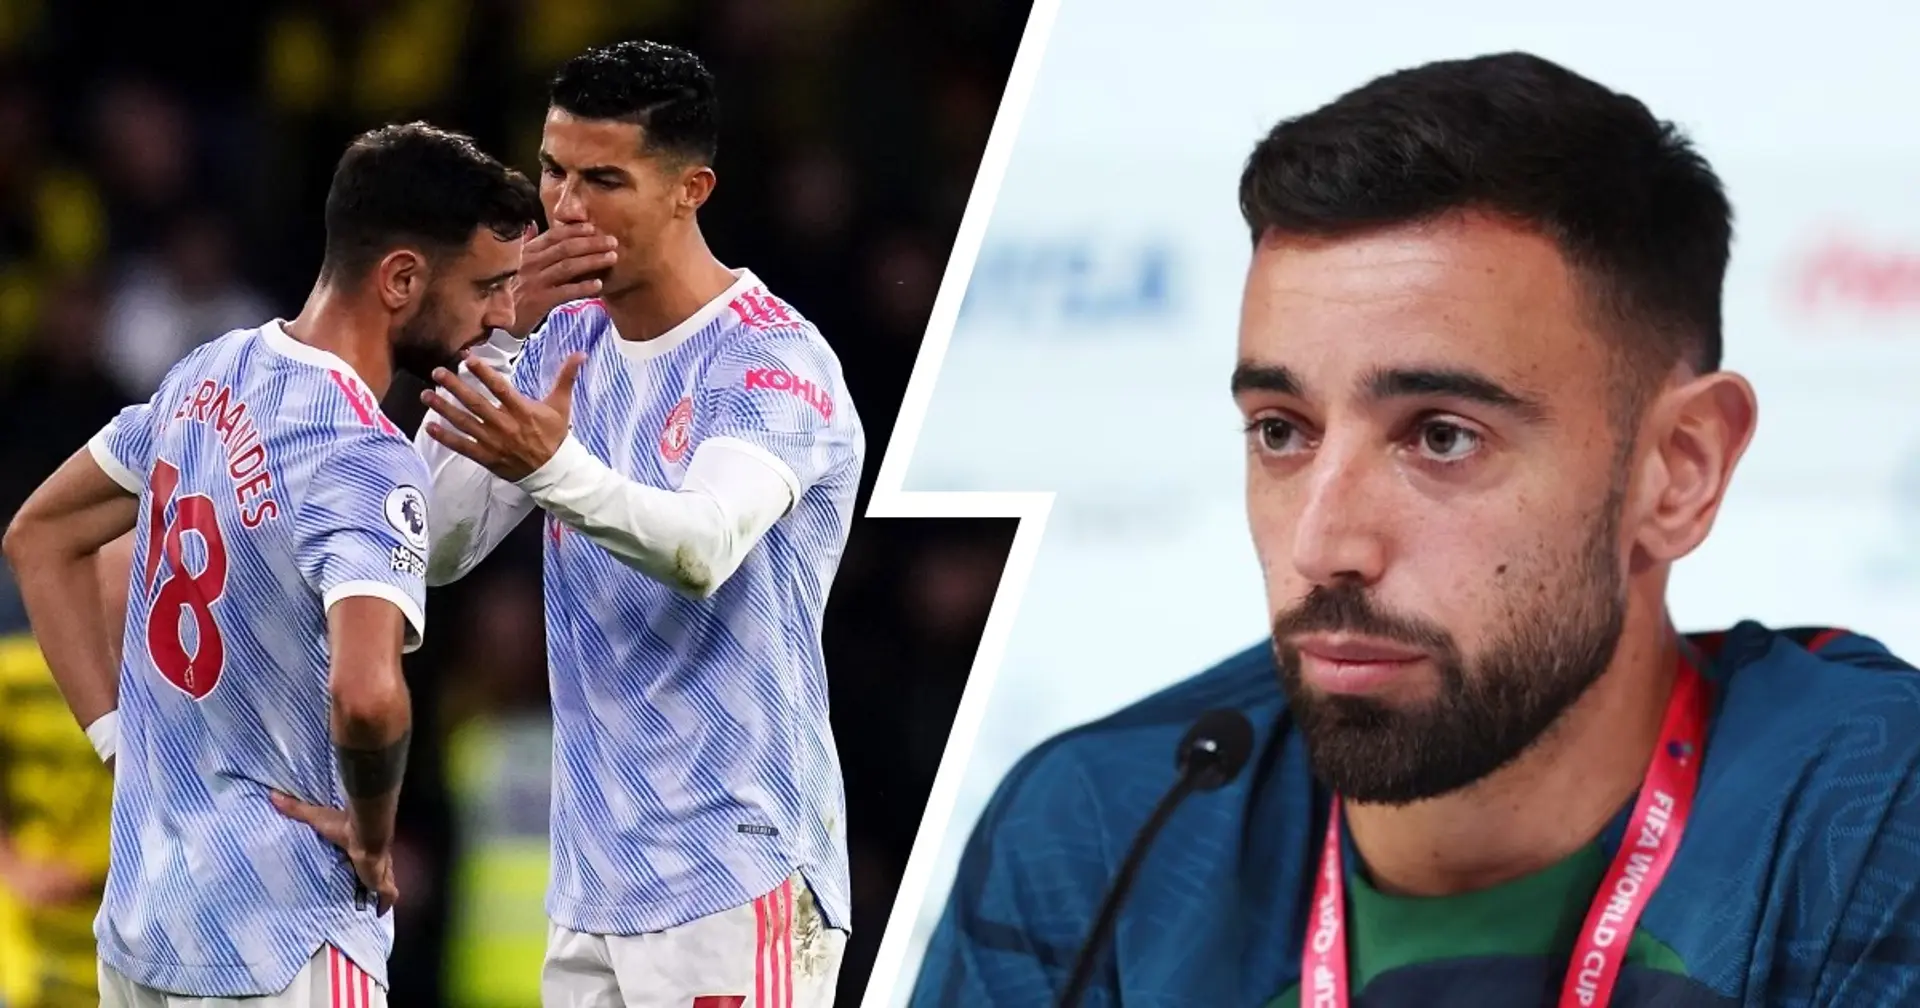 'Nothing lasts forever': Bruno Fernandes reacts to Ronaldo's Man United exit